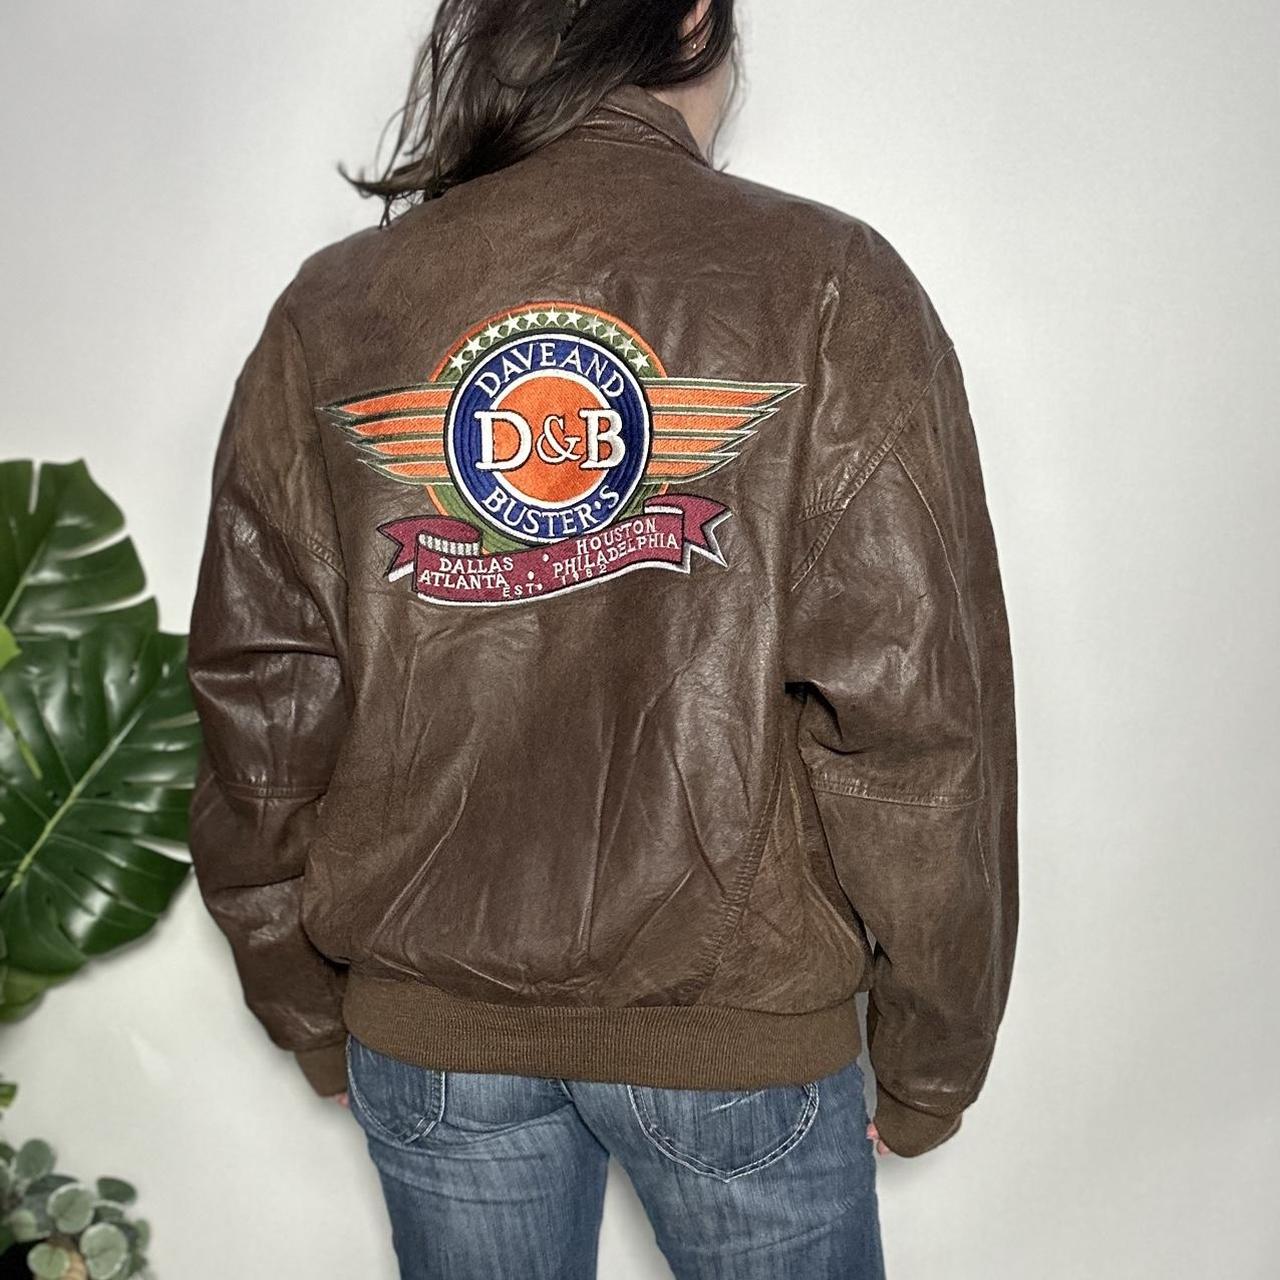 Vintage 90s Dave & Busters embroidered logo brown leather bomber jacket